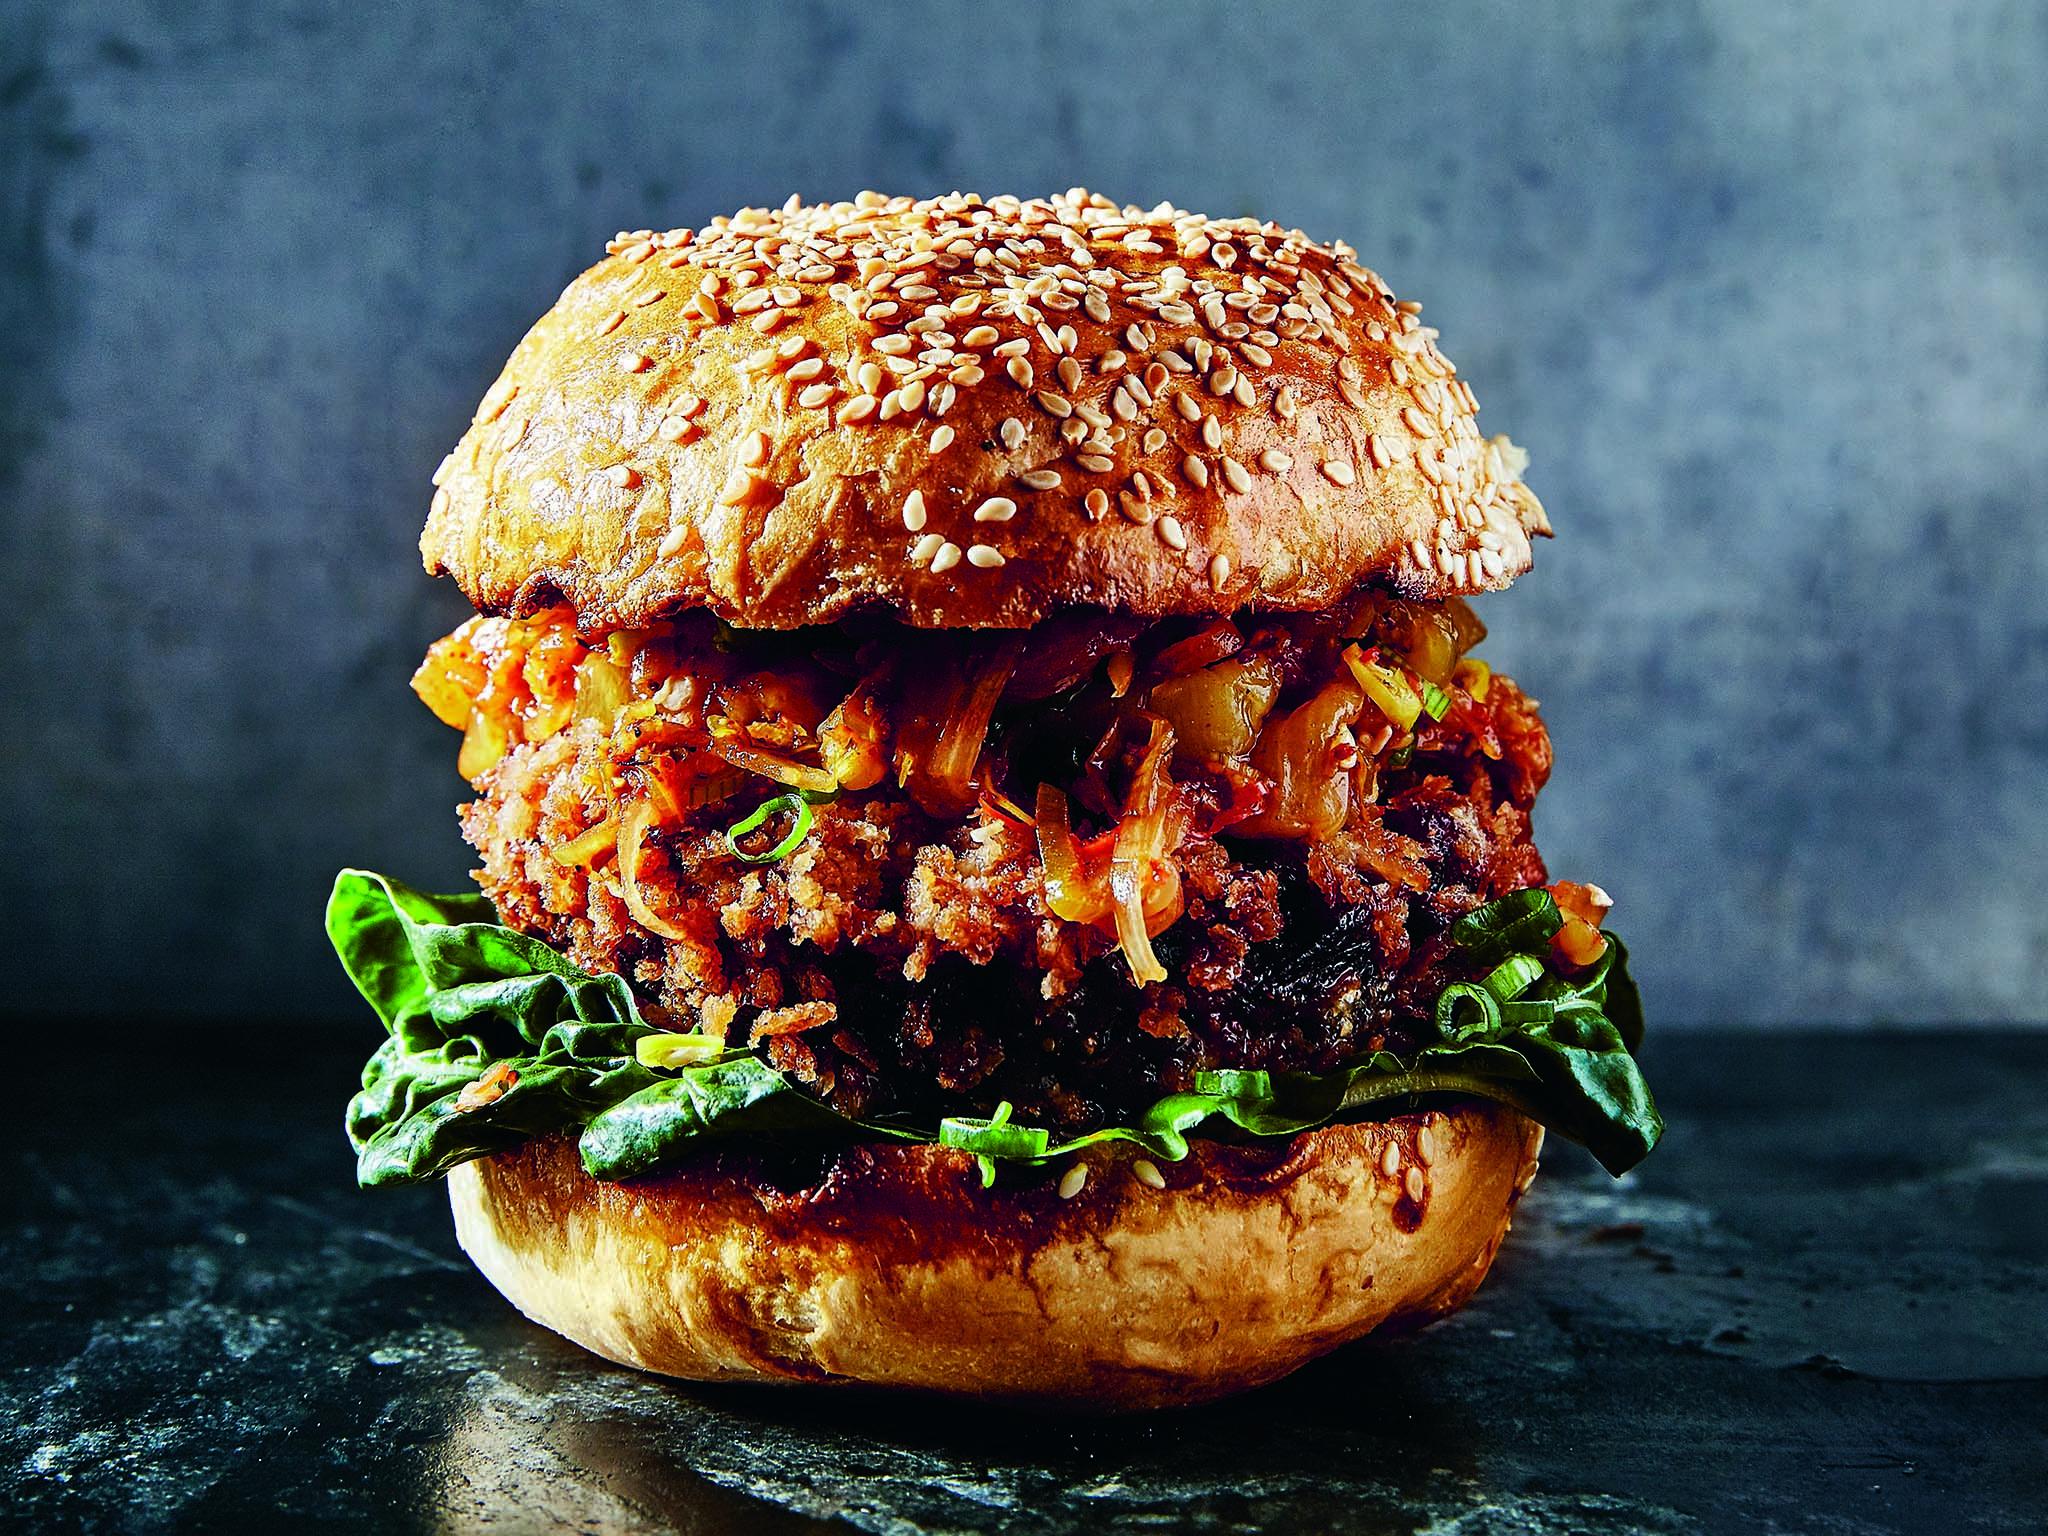 Three vegetarian burger recipes from Martin Nordin's Green Burgers book, The Independent